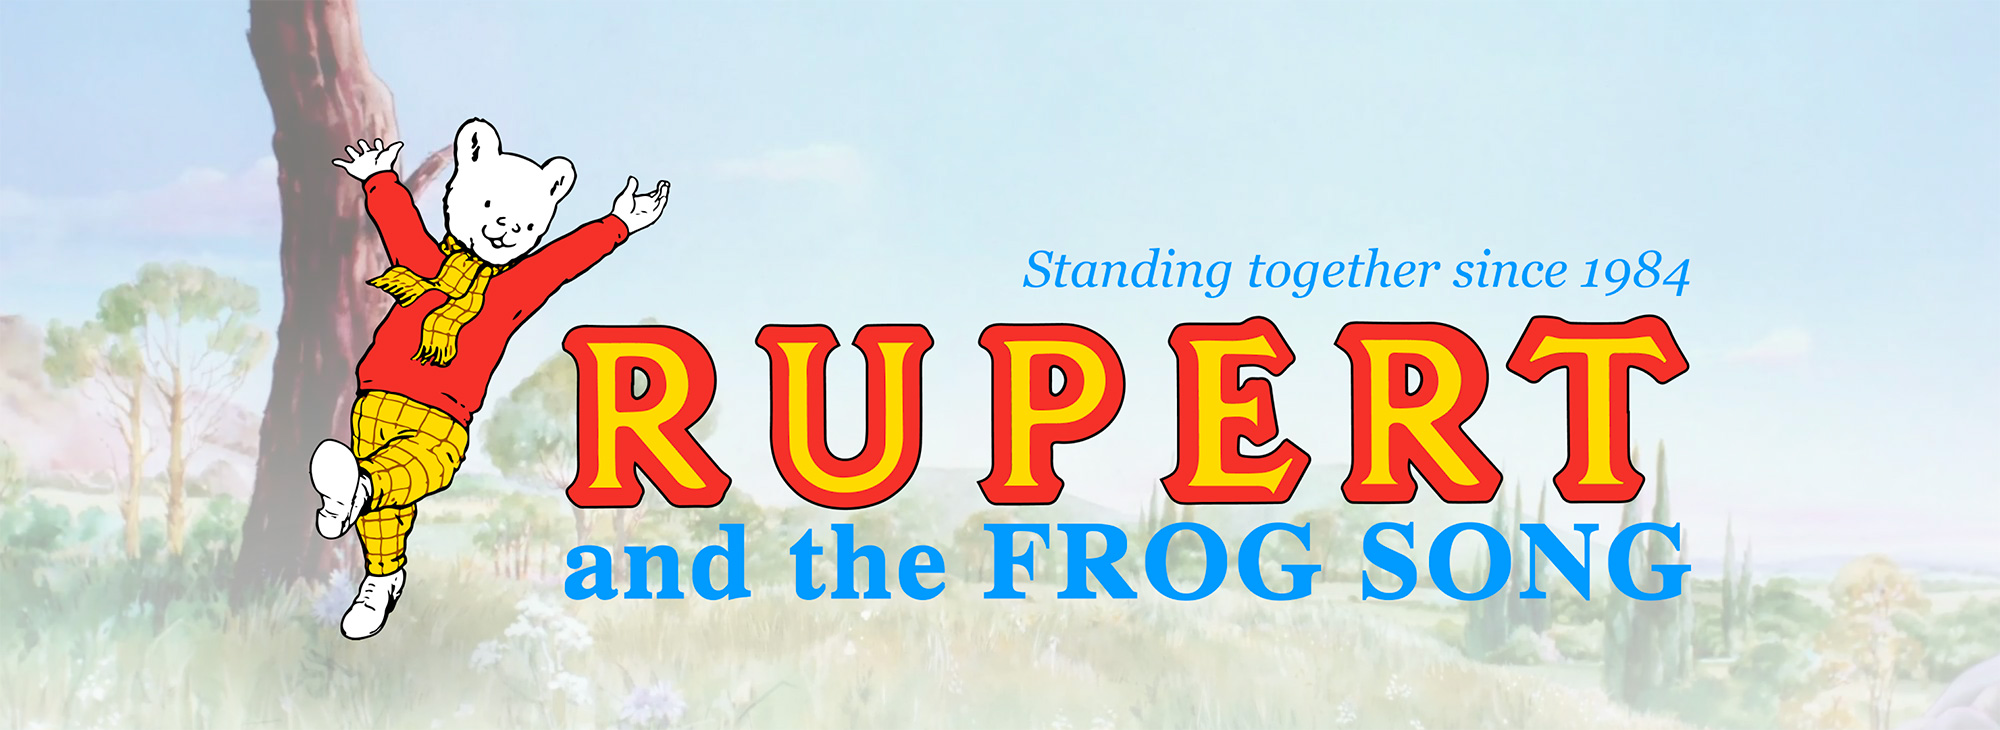 Rupert And The Frog Song